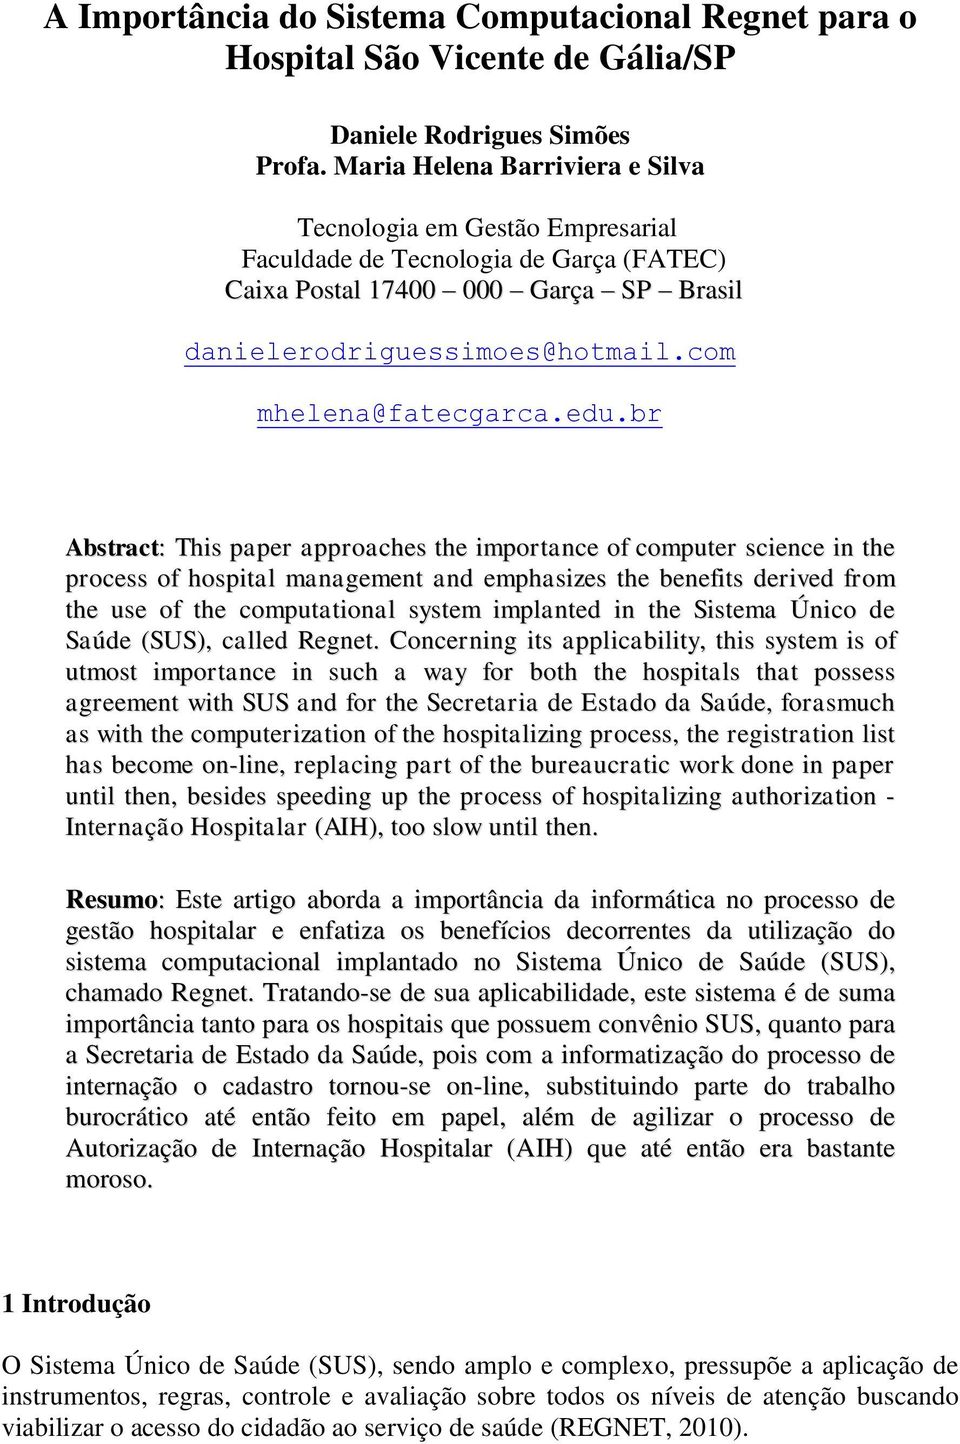 edu.br Abstract: This paper approaches the importance of computer science in the process of hospital management and emphasizes the benefits derived from the use of the computational system implanted